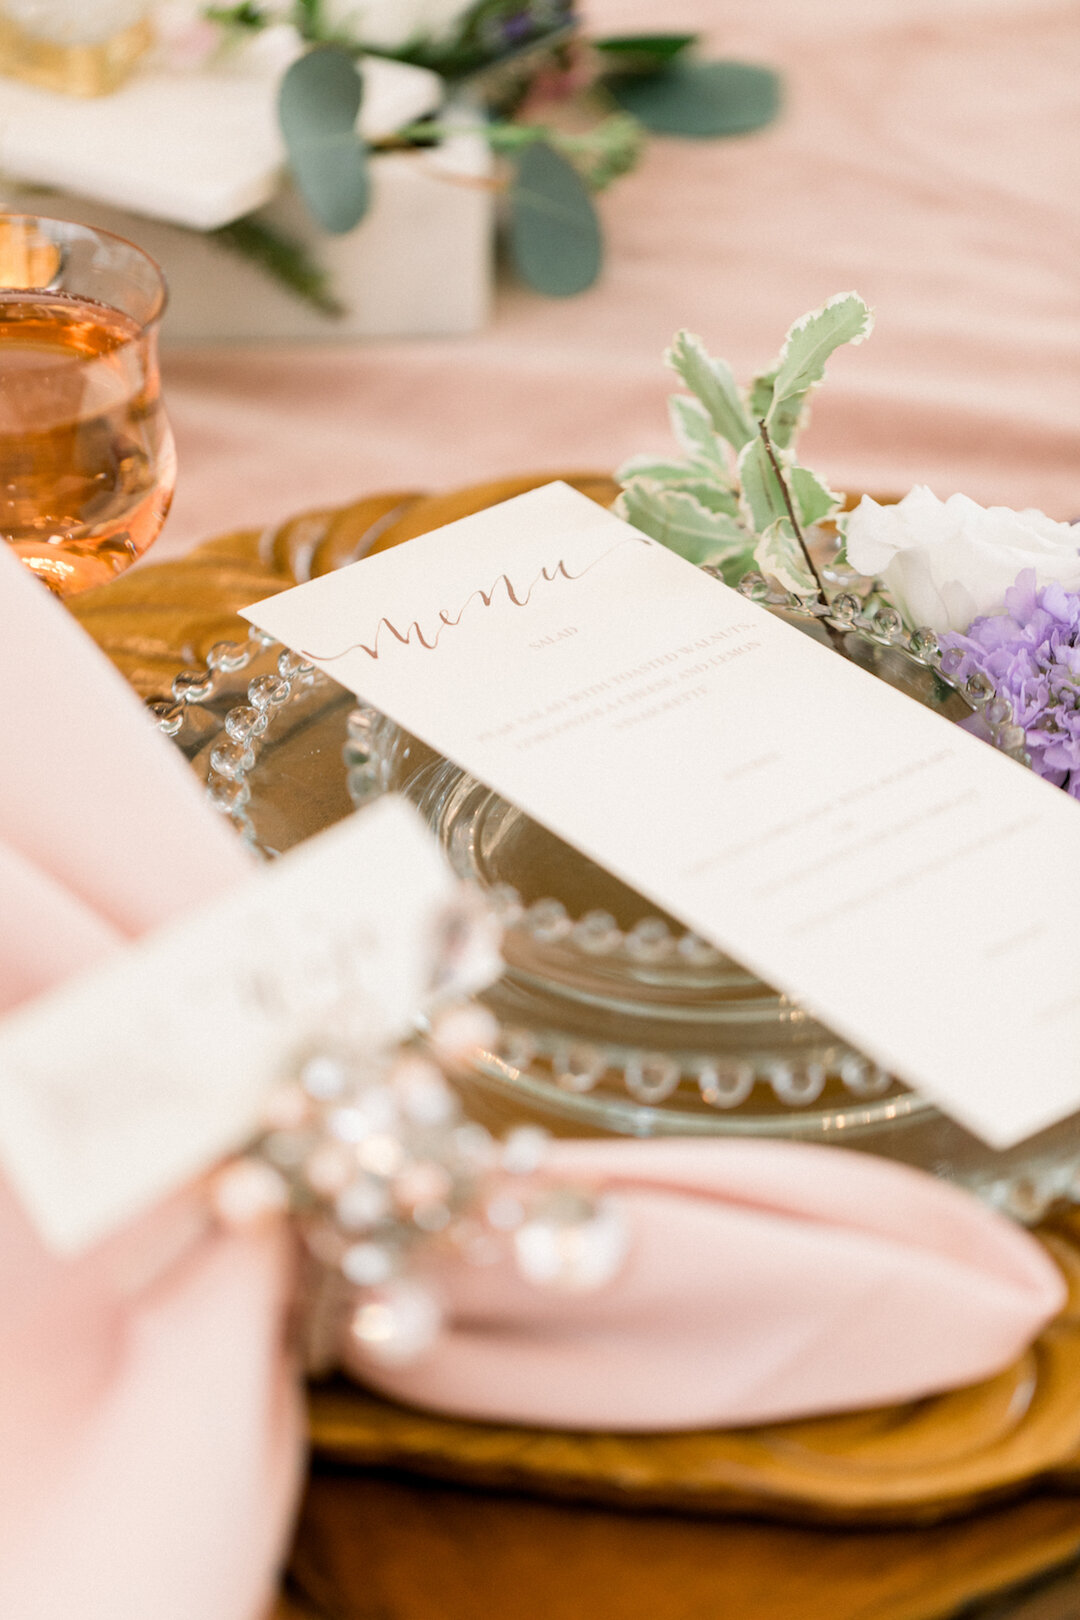 Modern and elegant wedding inspiration captured by Mandelette Photography. See more romantic wedding design ideas featured on CHItheeWED.com!